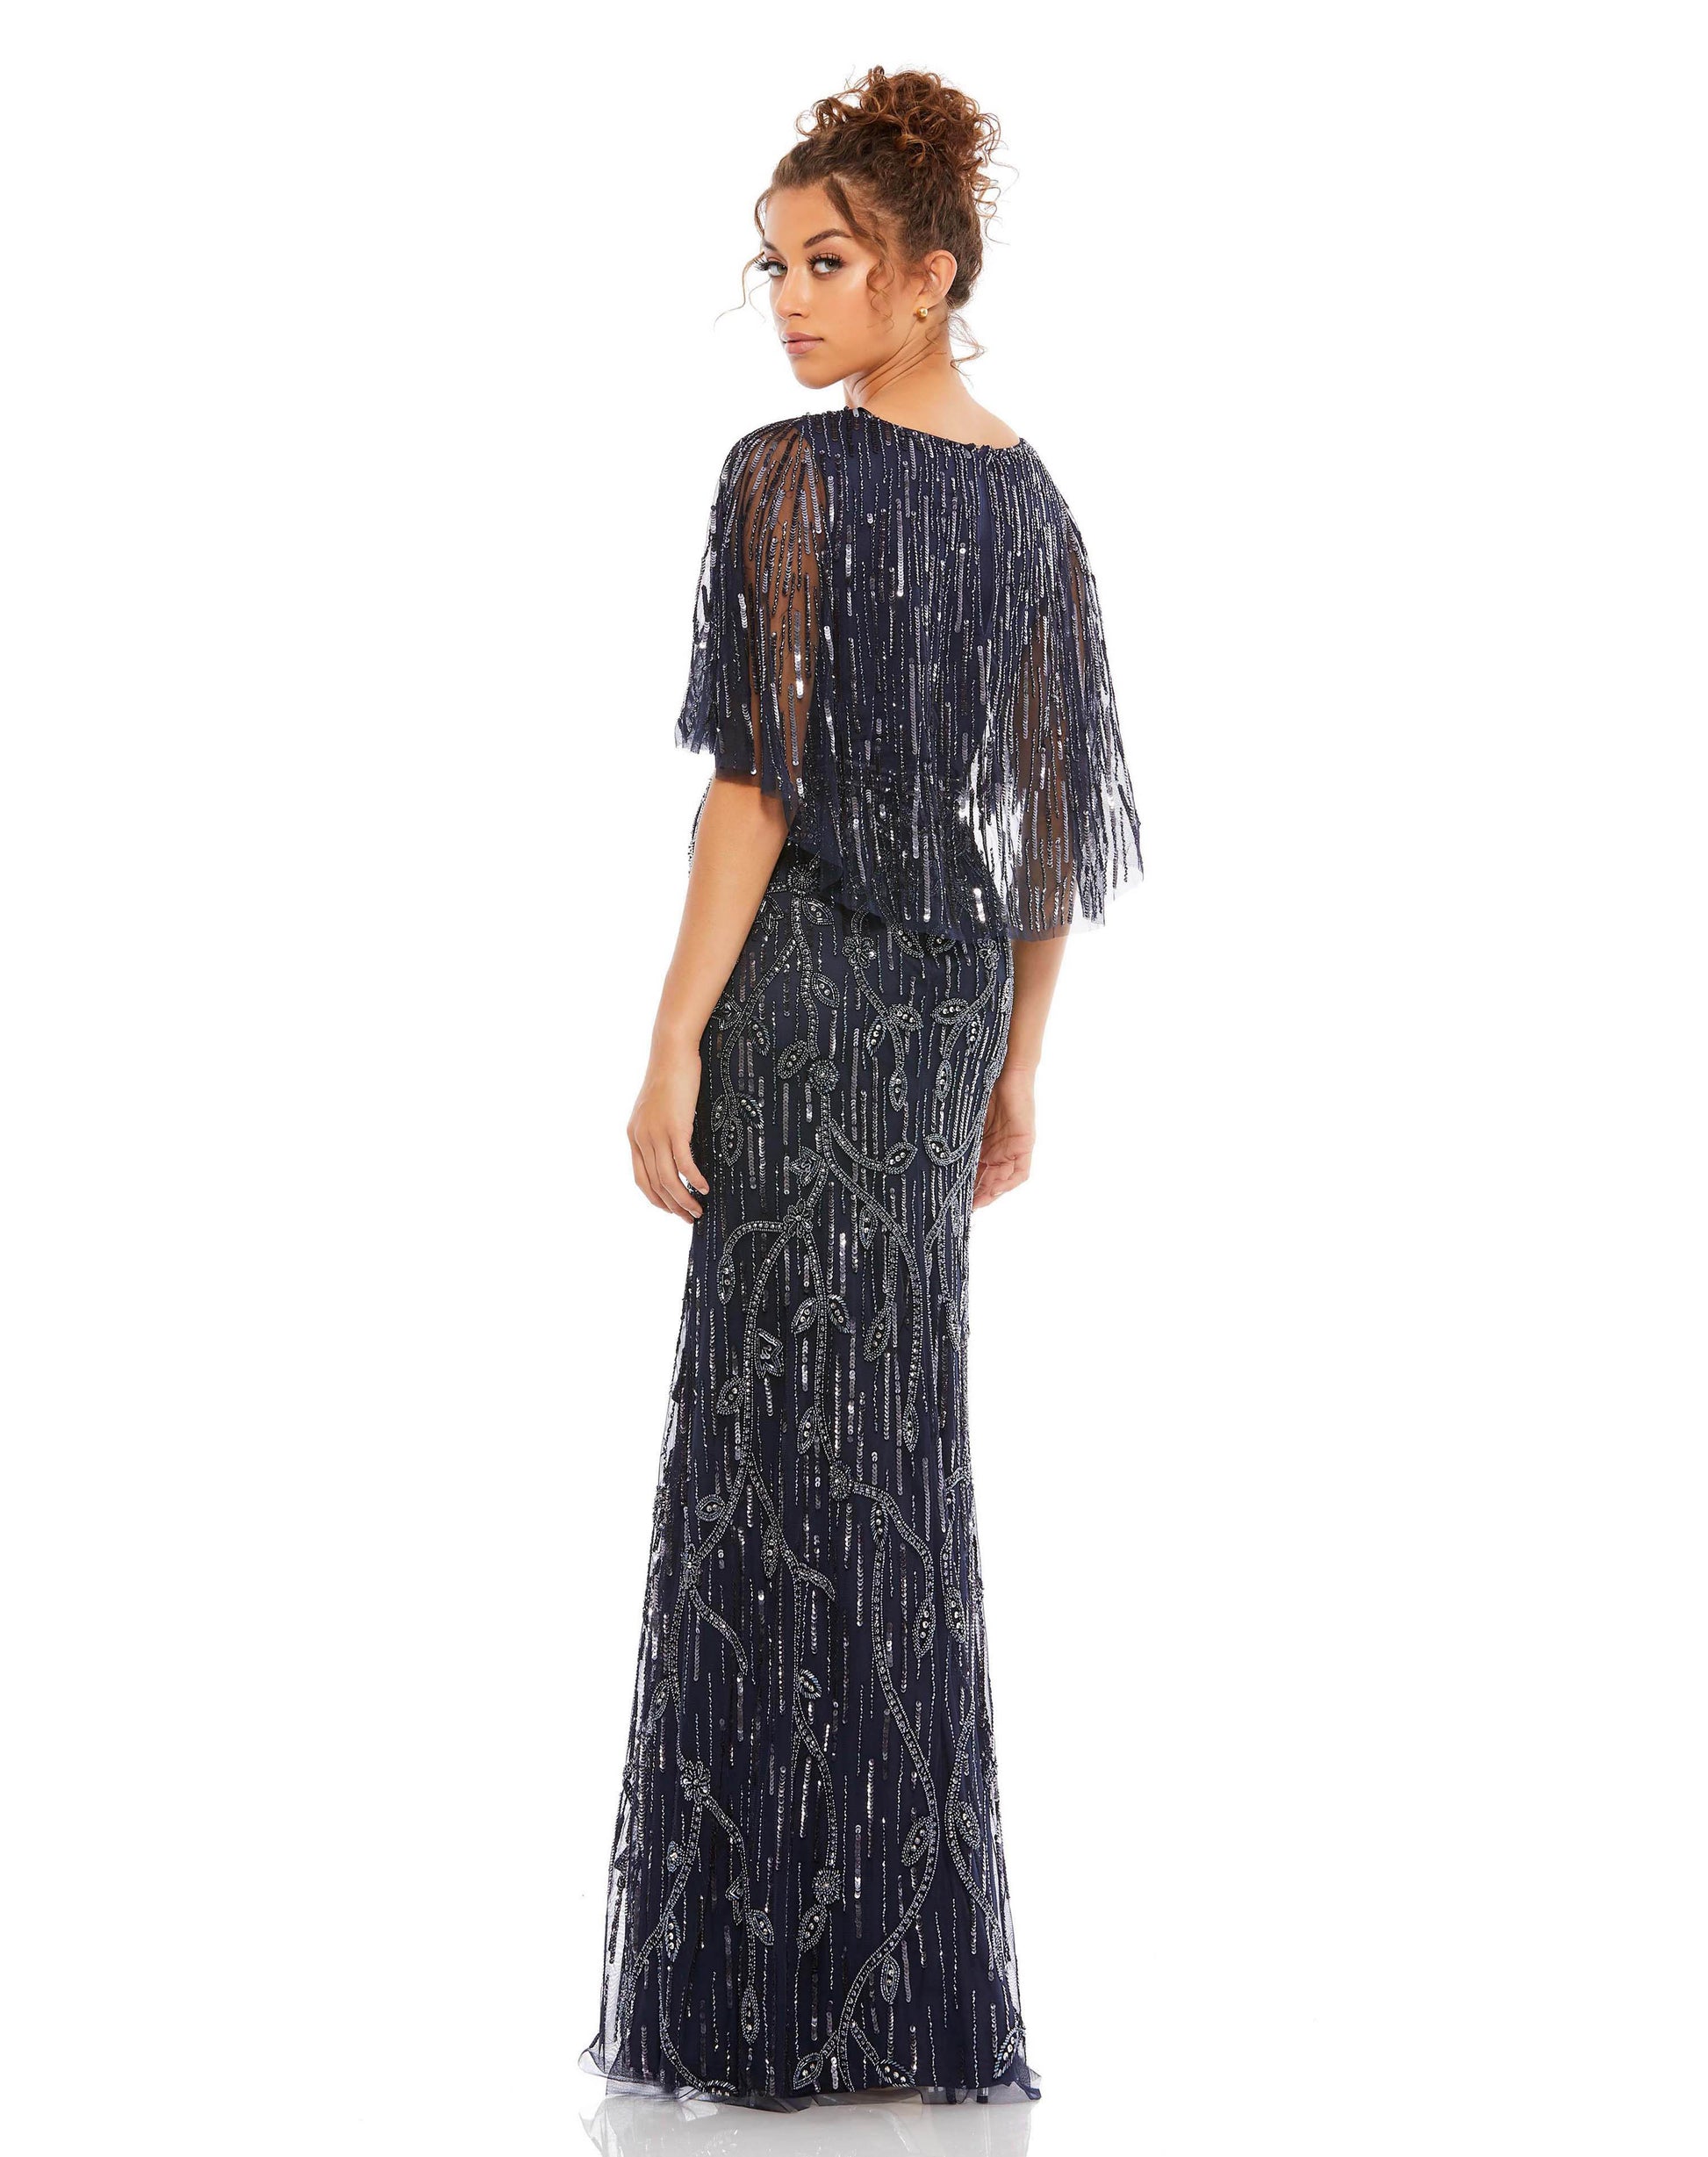 Elegant v-neck surplice evening gown adorned with sequin-and-bead floral accents throughout the mesh overlay. The sheer flutter sleeves and cape-style back feature rows of sequined embellishment. Mac Duggal 100% Polyester Fully Lined (with exception of sl